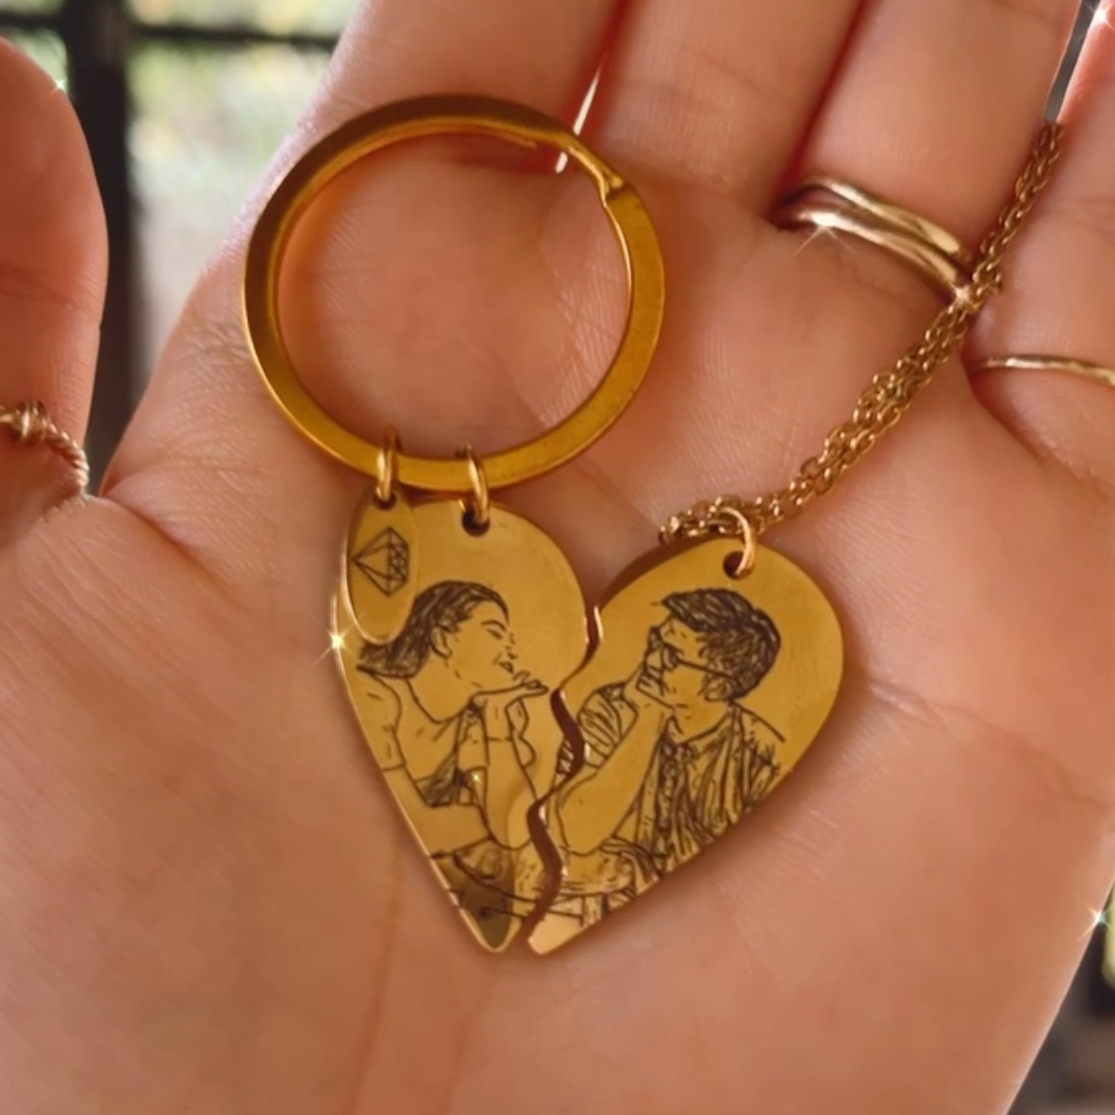 Lazer Engraved Piece of My Heart Necklace / Keychain - LINE ART